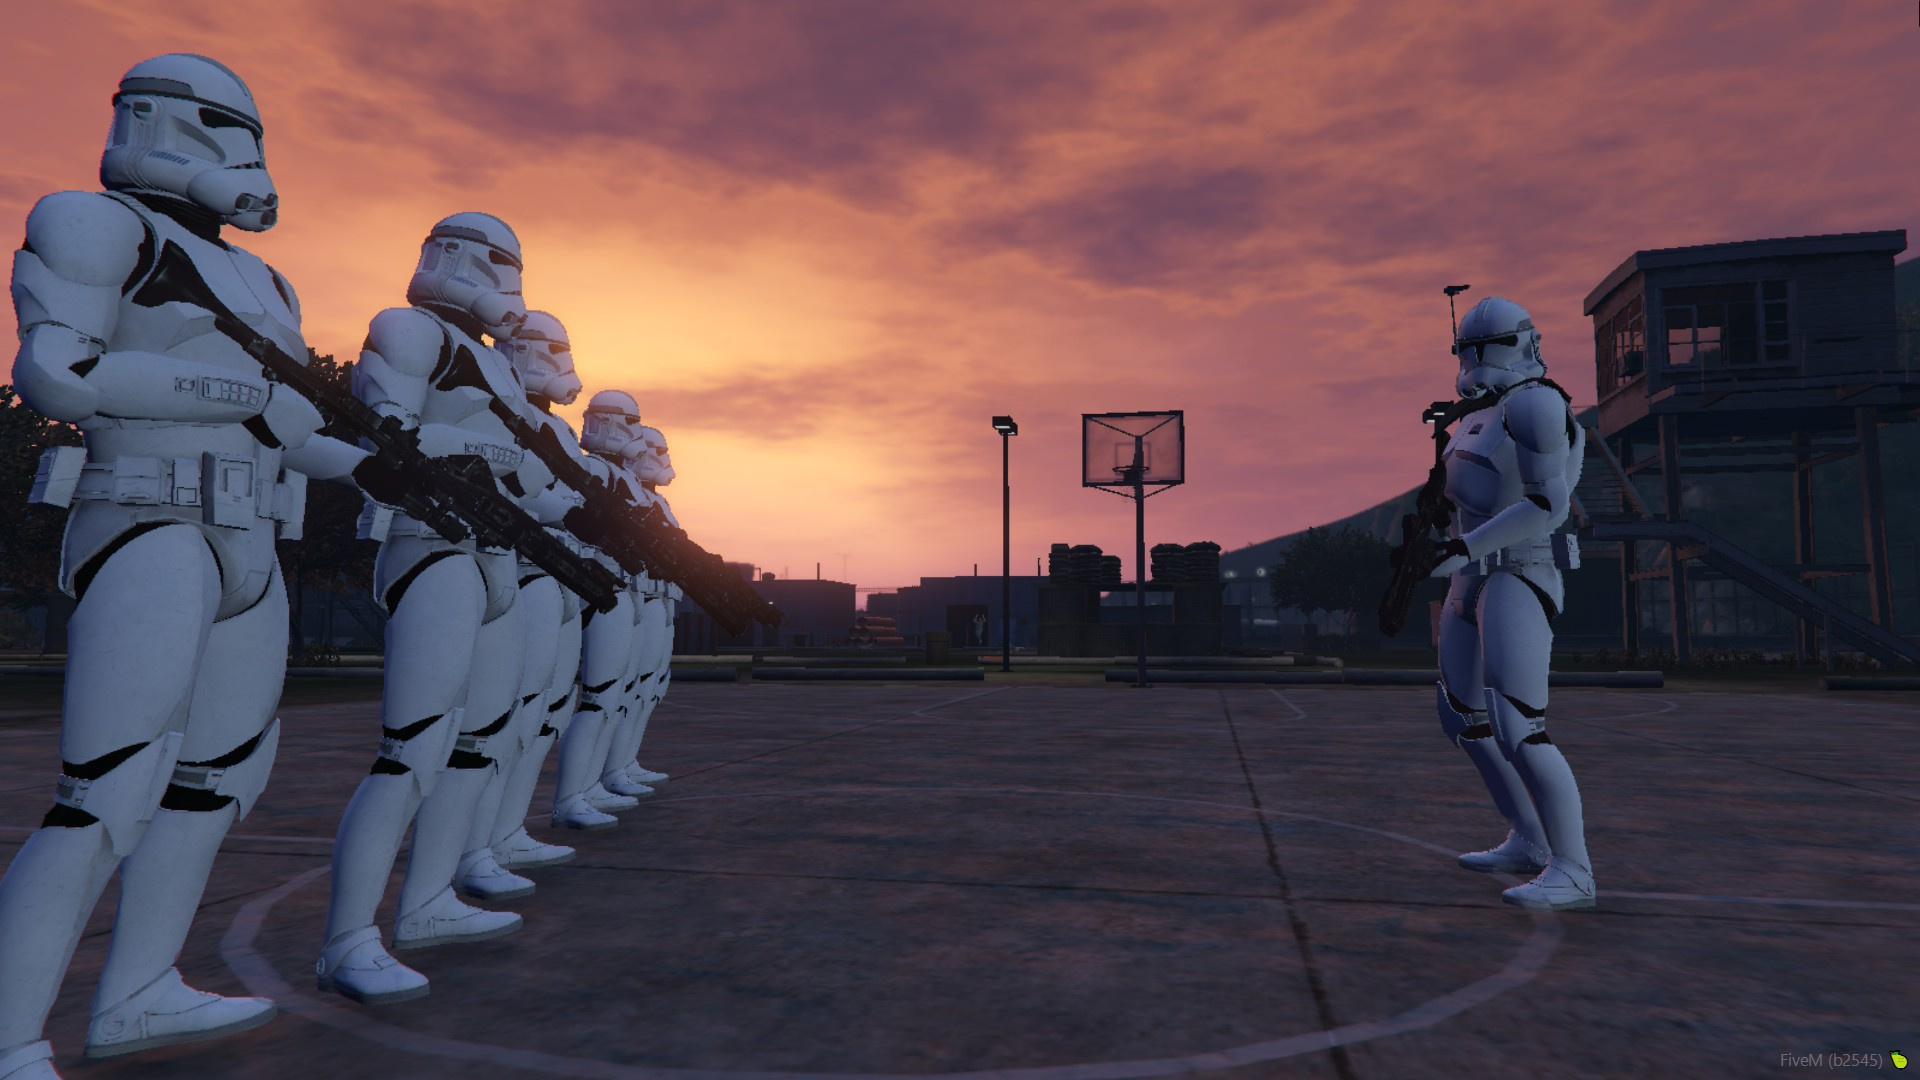 Star Wars: Battlefront 2 Mod Adds 25 New Playable Characters